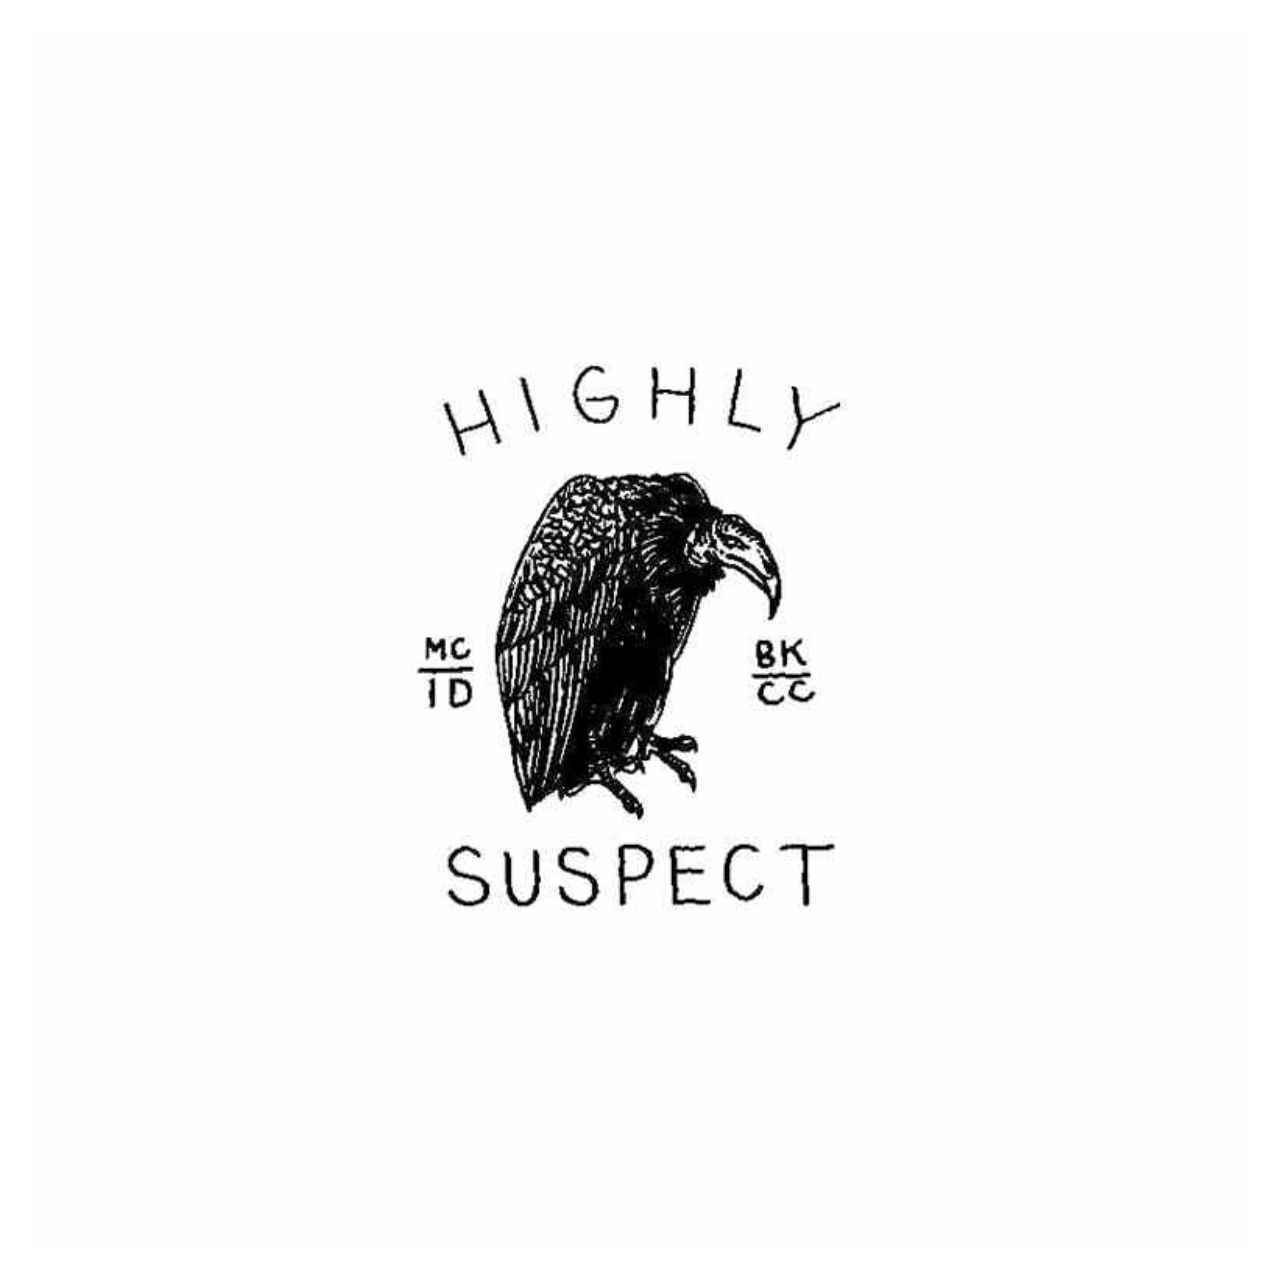 Suspect Logo - Highly Suspect Band Decal Sticker